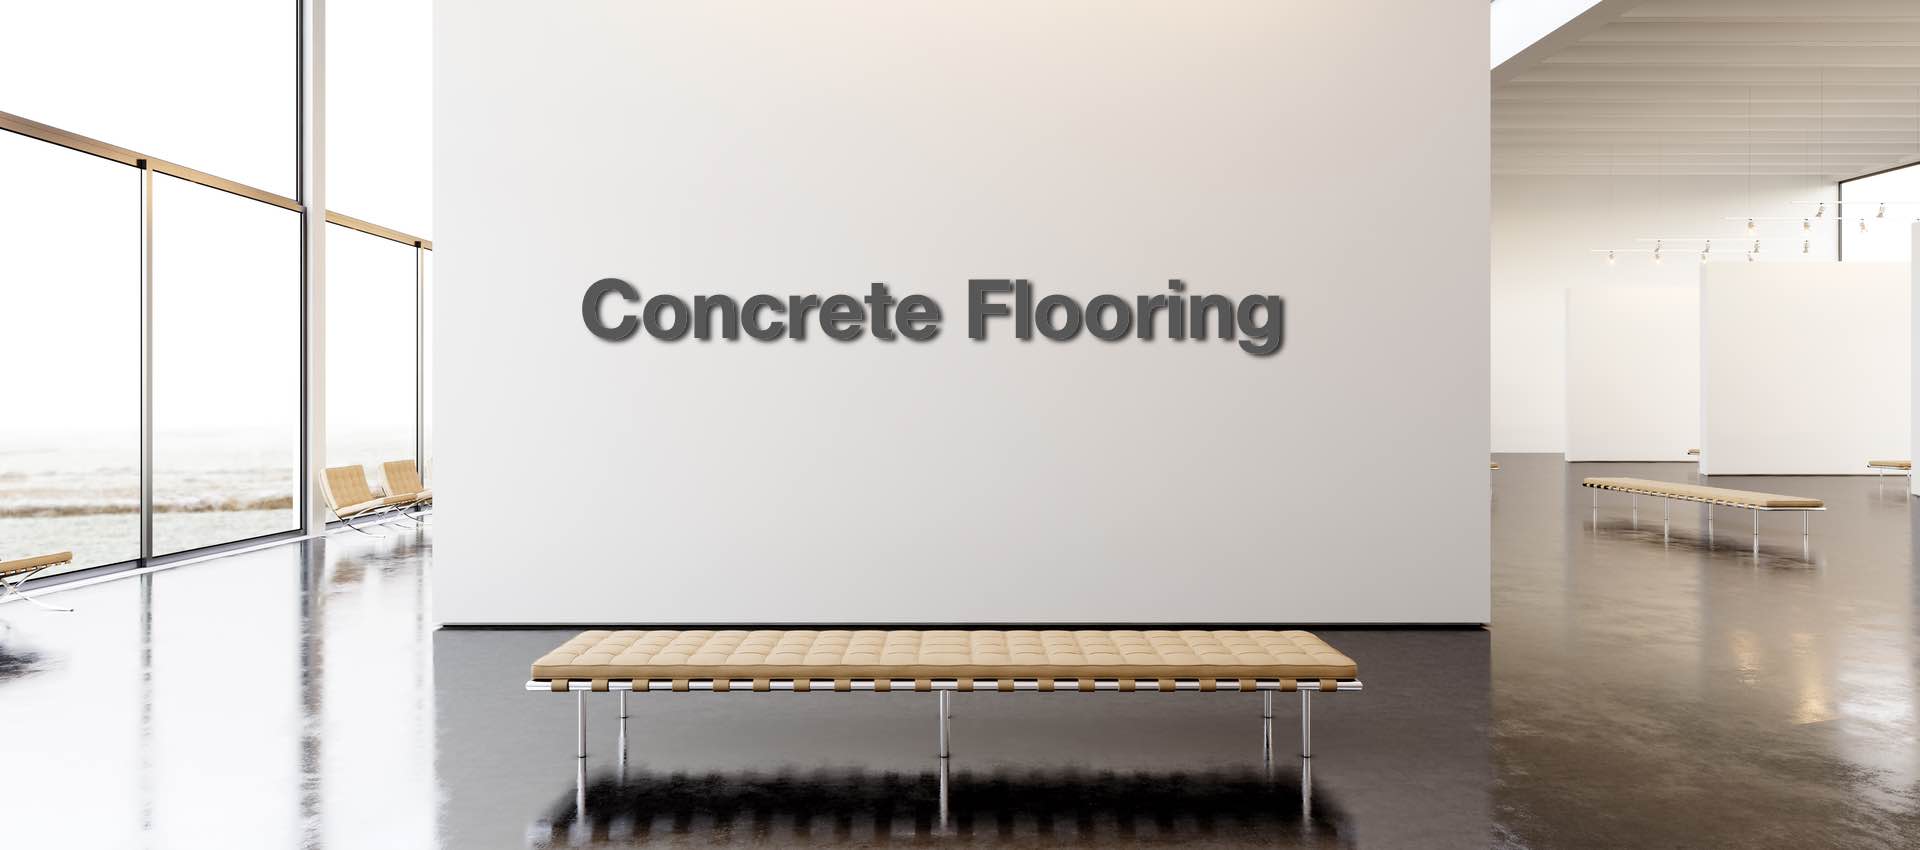 How to Clean Concrete Flooring